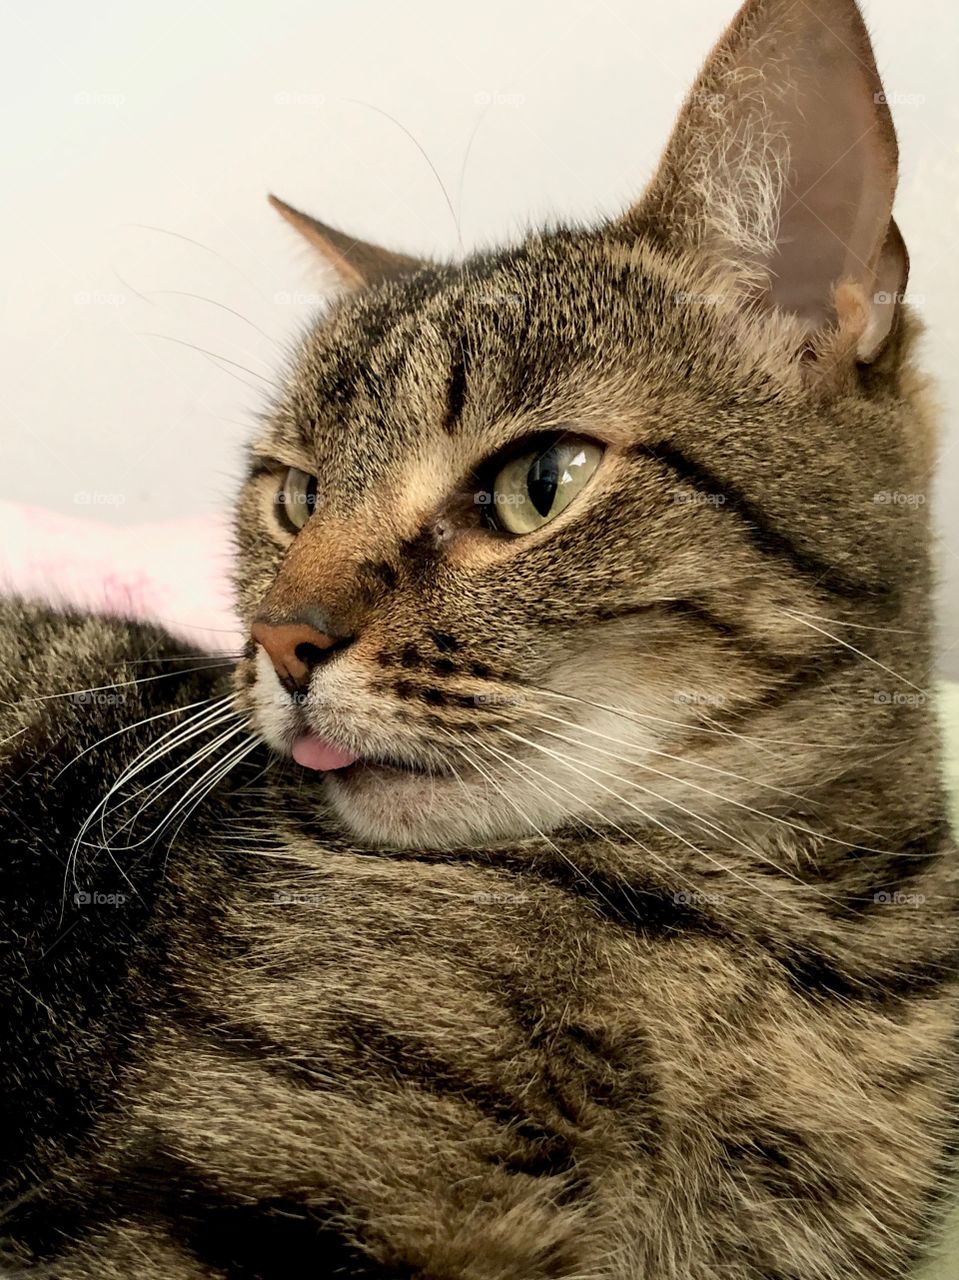 Cute tabby cat sticking her tongue out! 